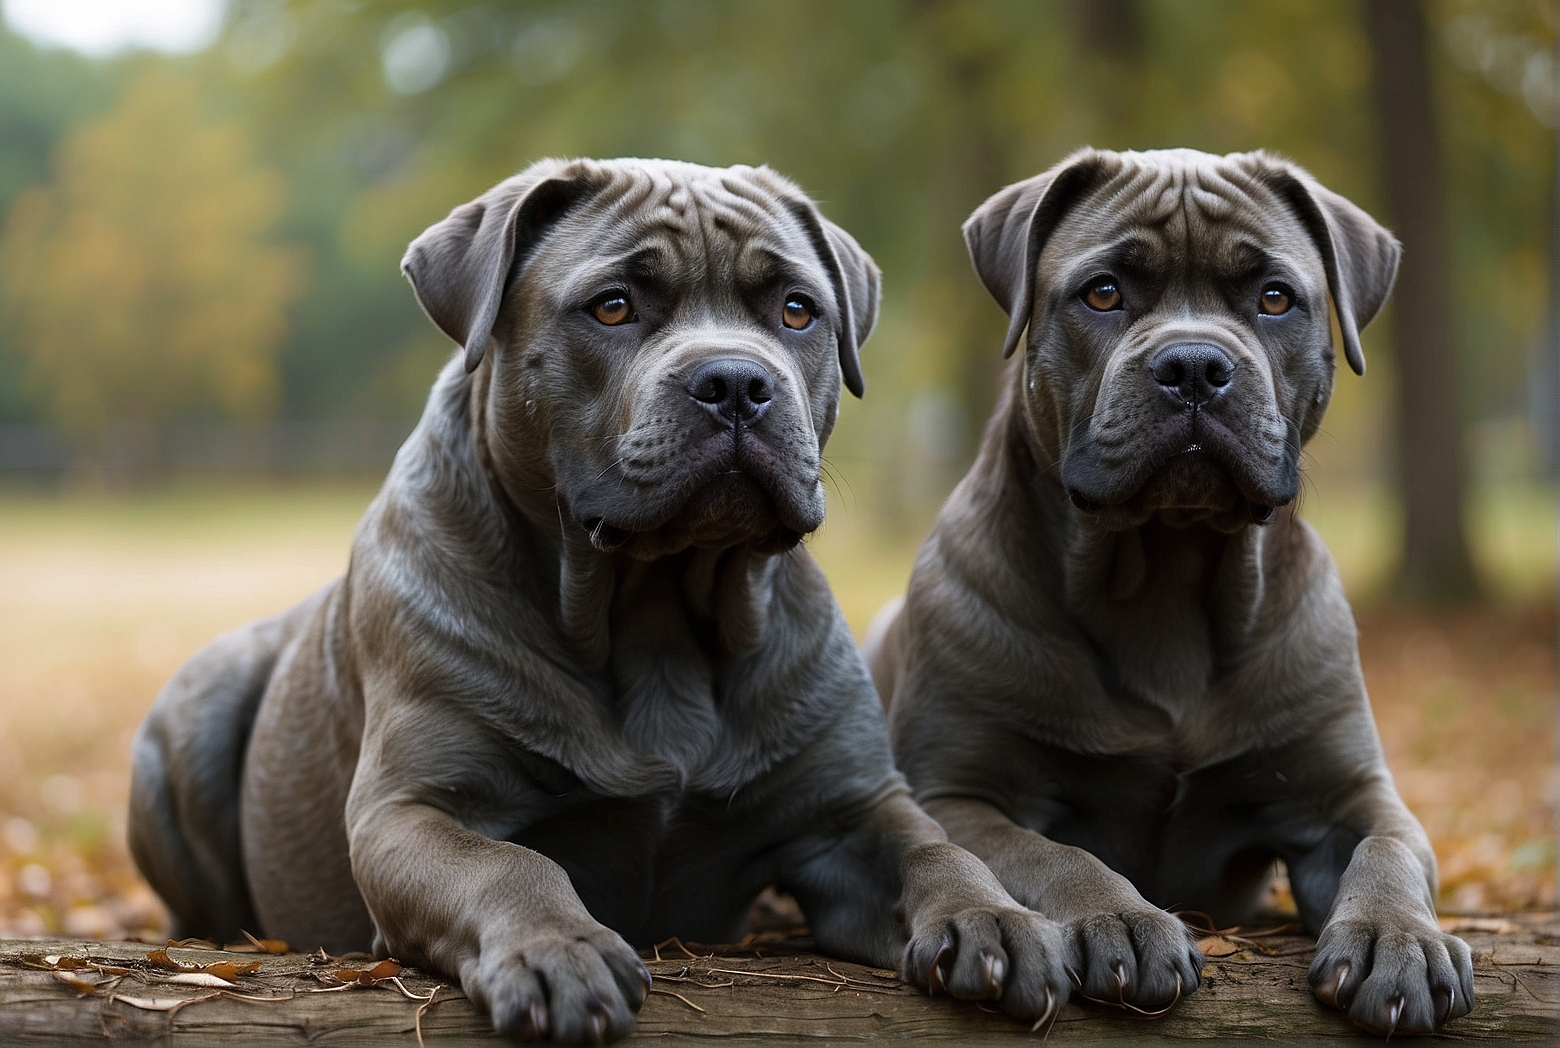 How many different breeds of Cane Corso are there?